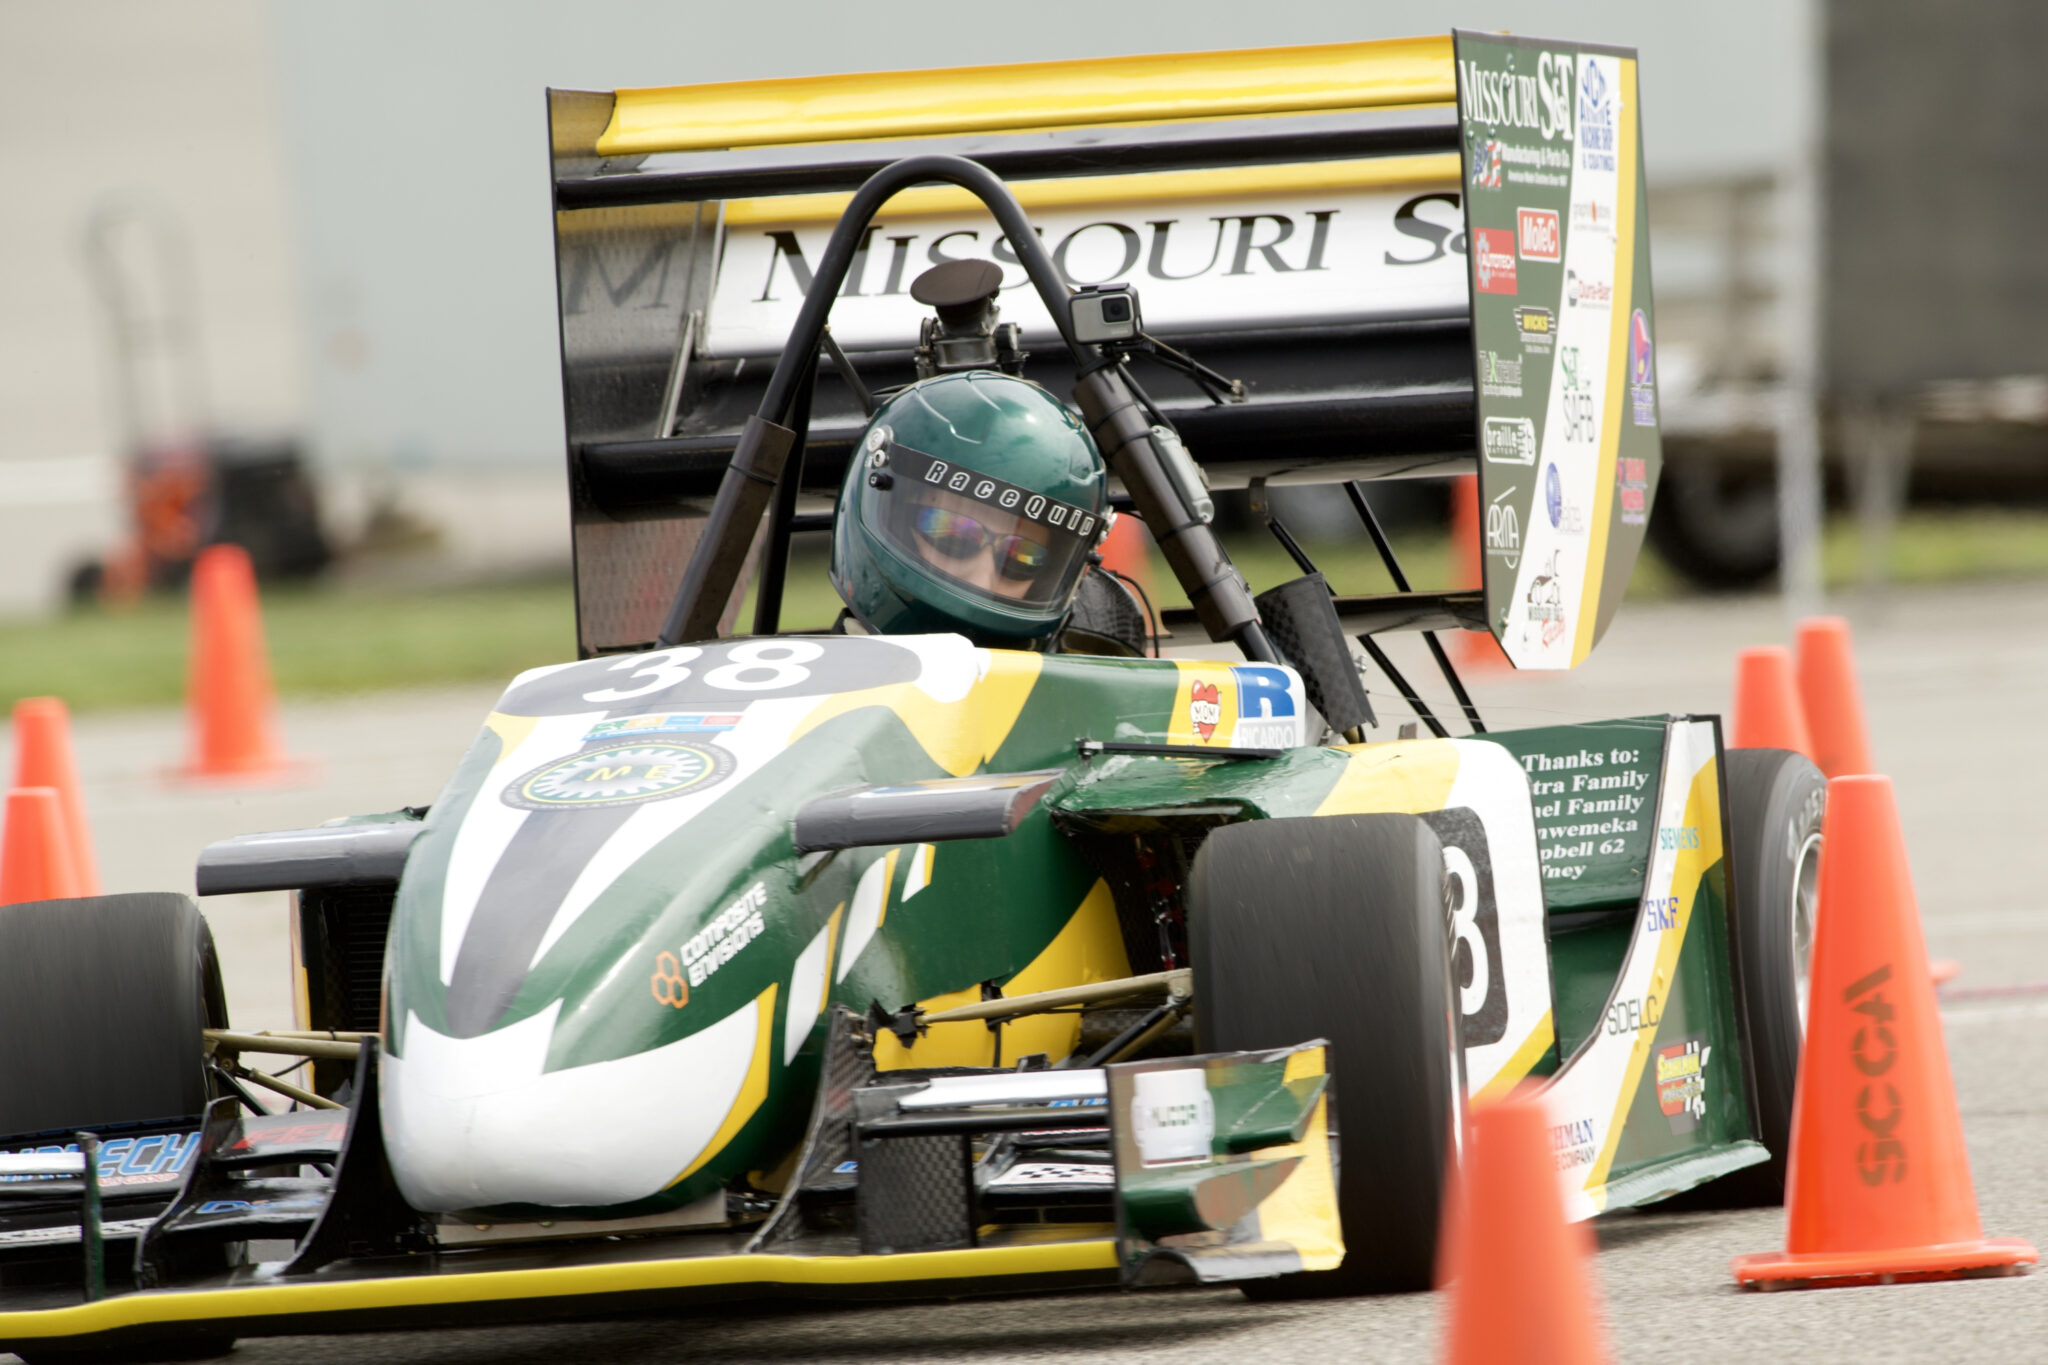 Missouri S&T News and Events S&T’s Formula SAE team finishes third